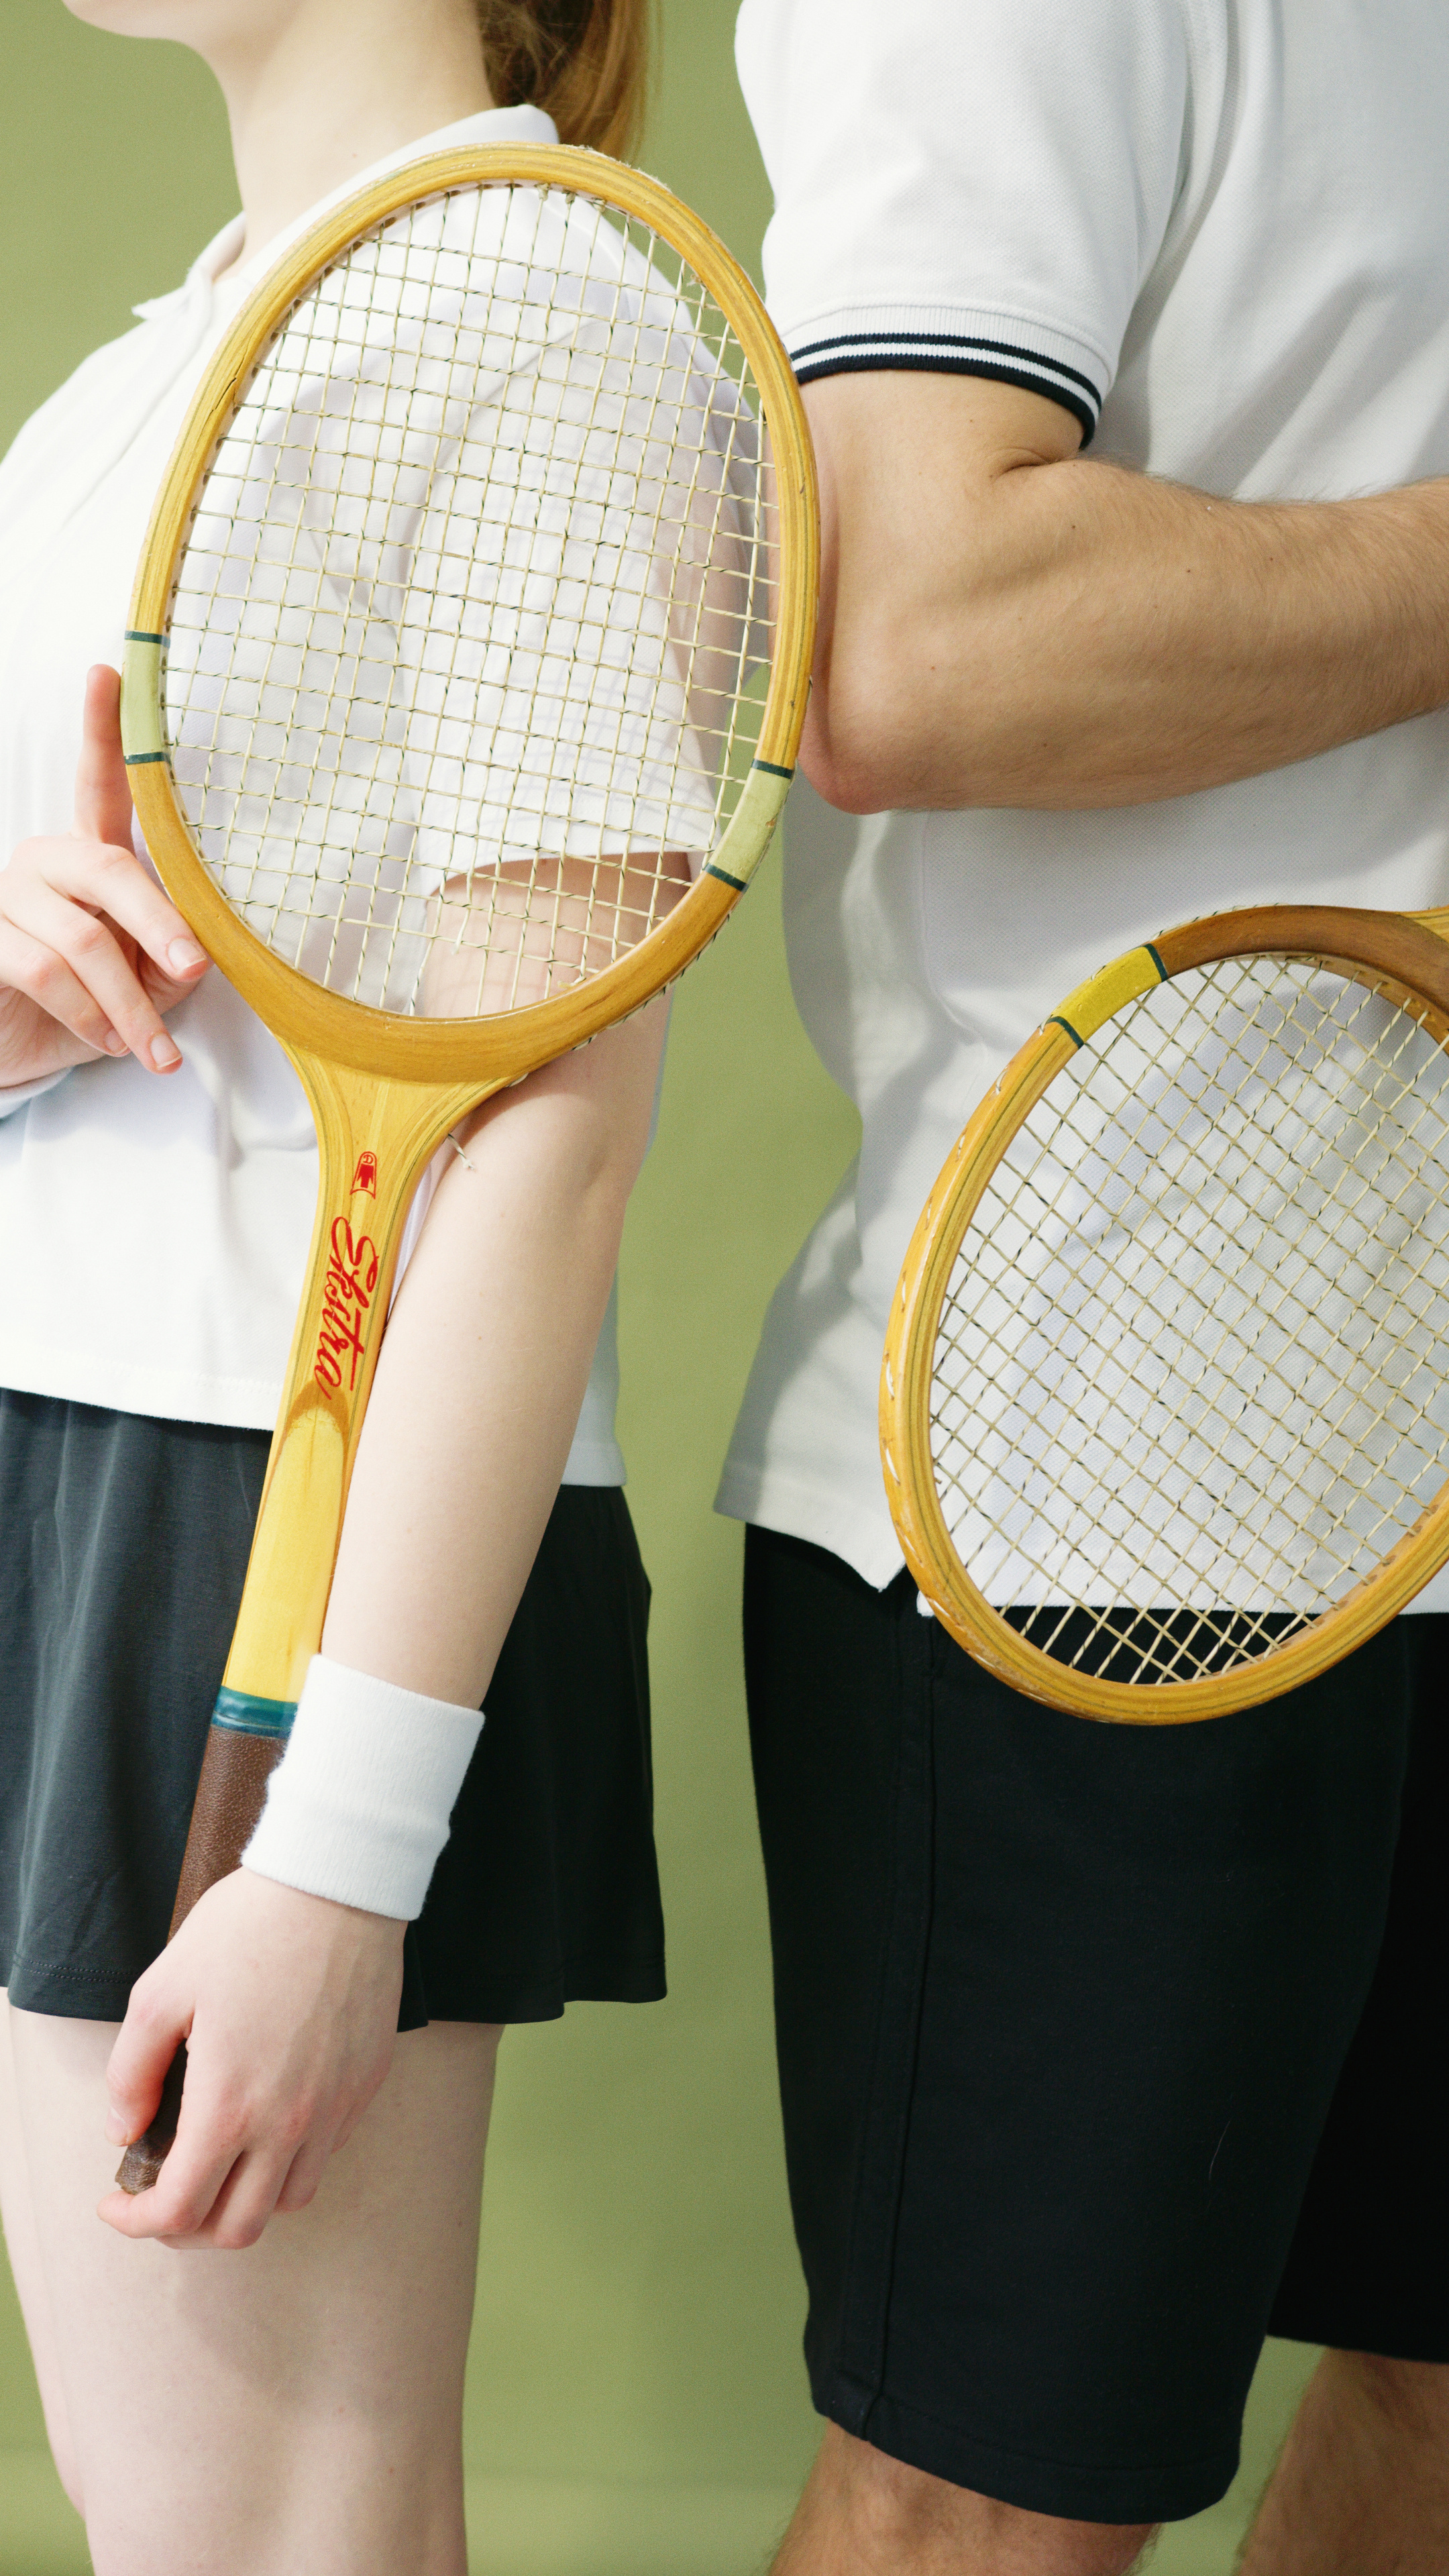 Squash (Sport): A Racket and Ball Sport Played by Two or Four Players. 2160x3840 4K Wallpaper.